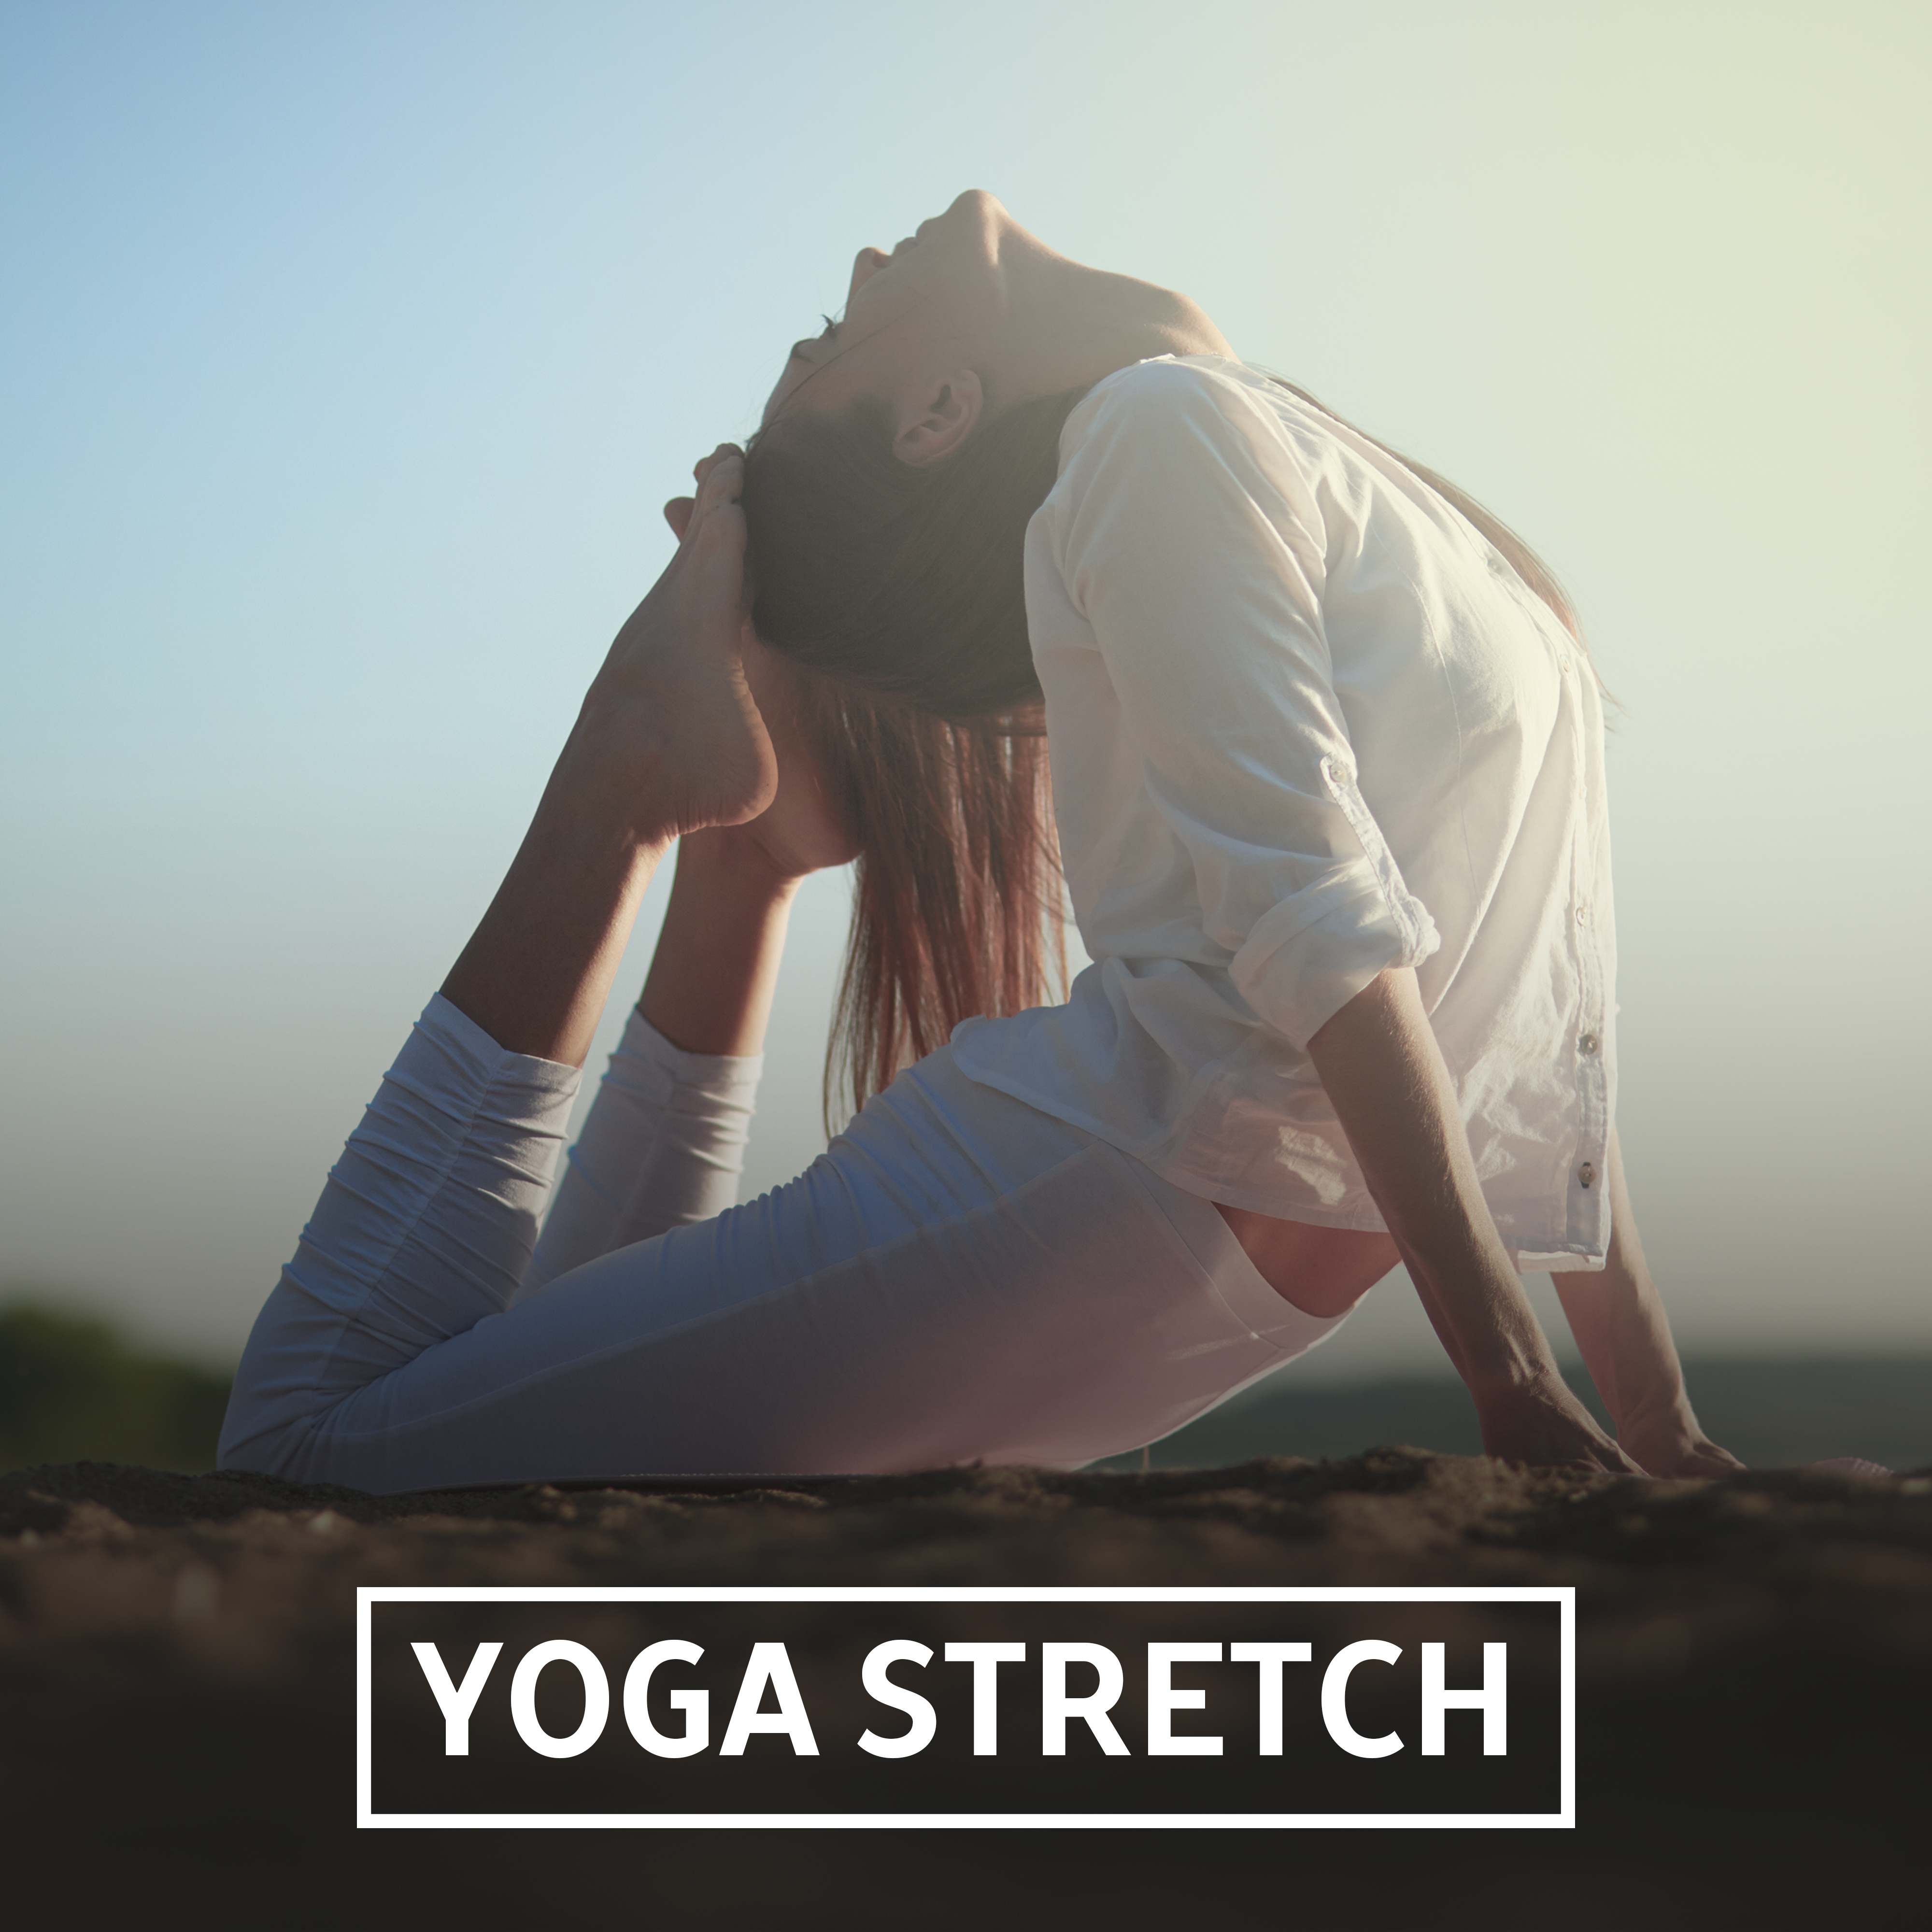 Yoga Stretch – Train Your Mind, Deep Focus, Healing Piano, Meditation Music, Nature Sounds, Total Relaxation, Kundalini Yoga